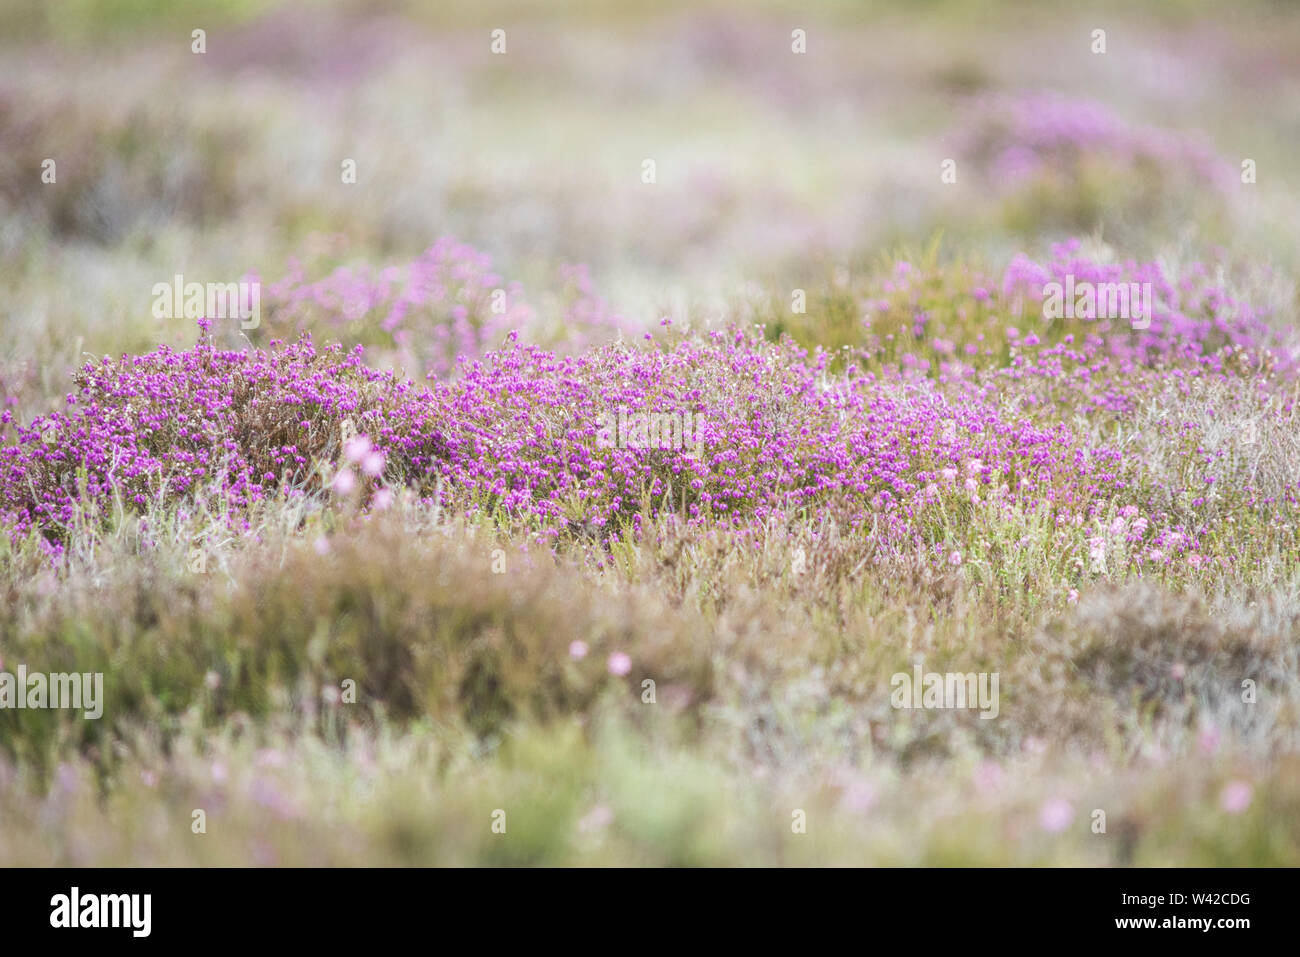 Bright patch of purple heather in flower with unflowering heather in foreground and background Stock Photo